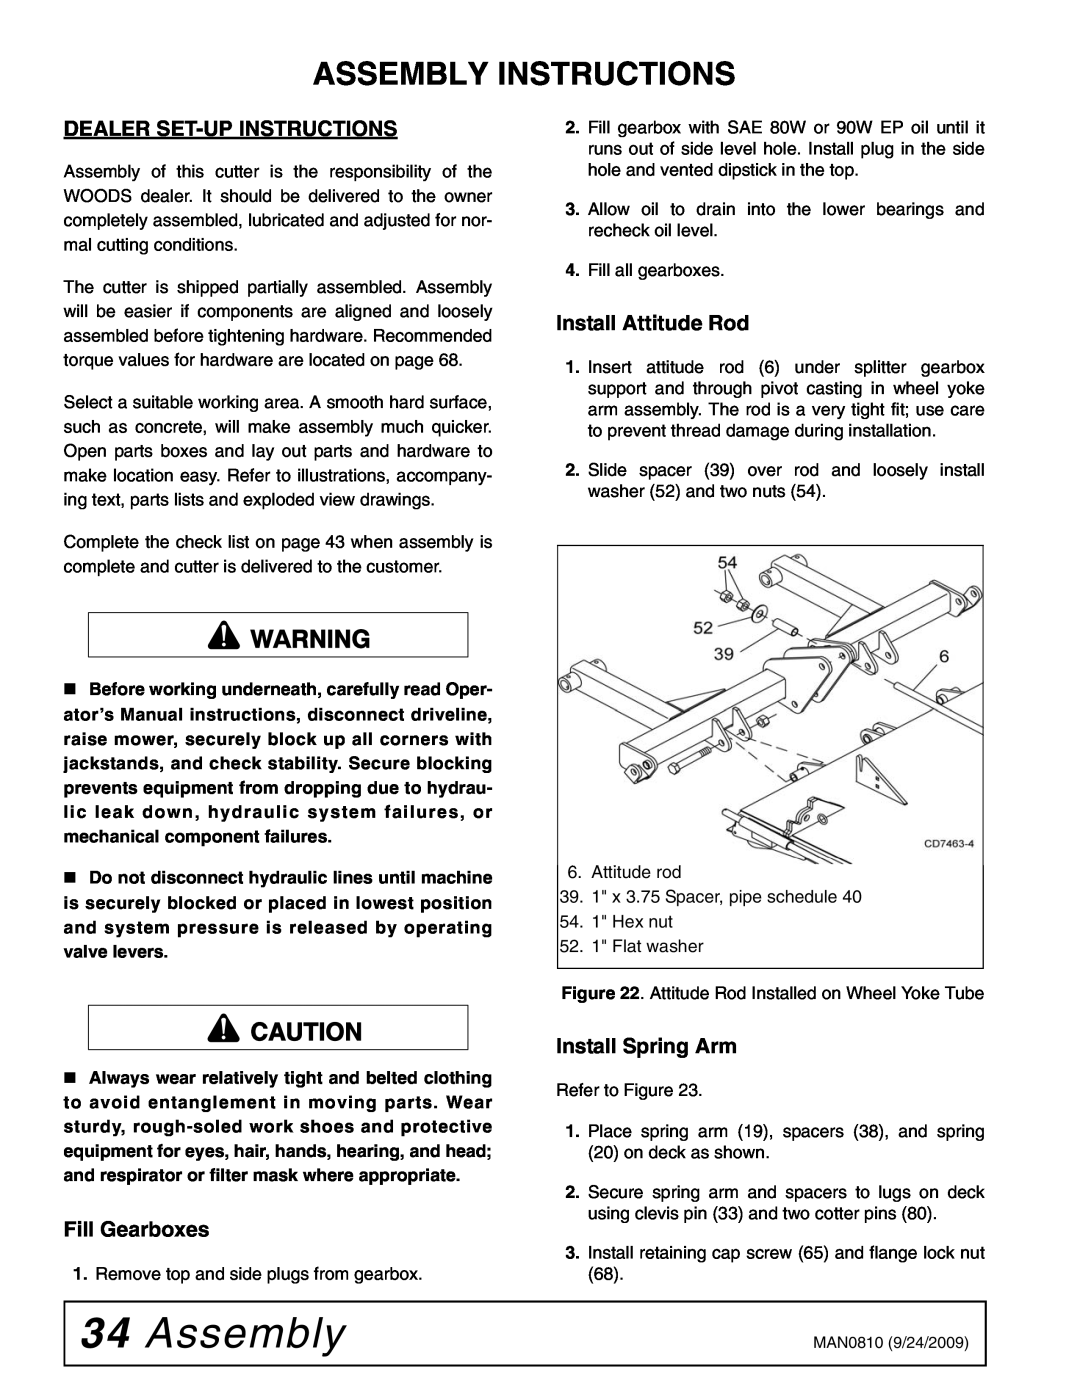 Woods Equipment BW15LH manual Assembly Instructions 